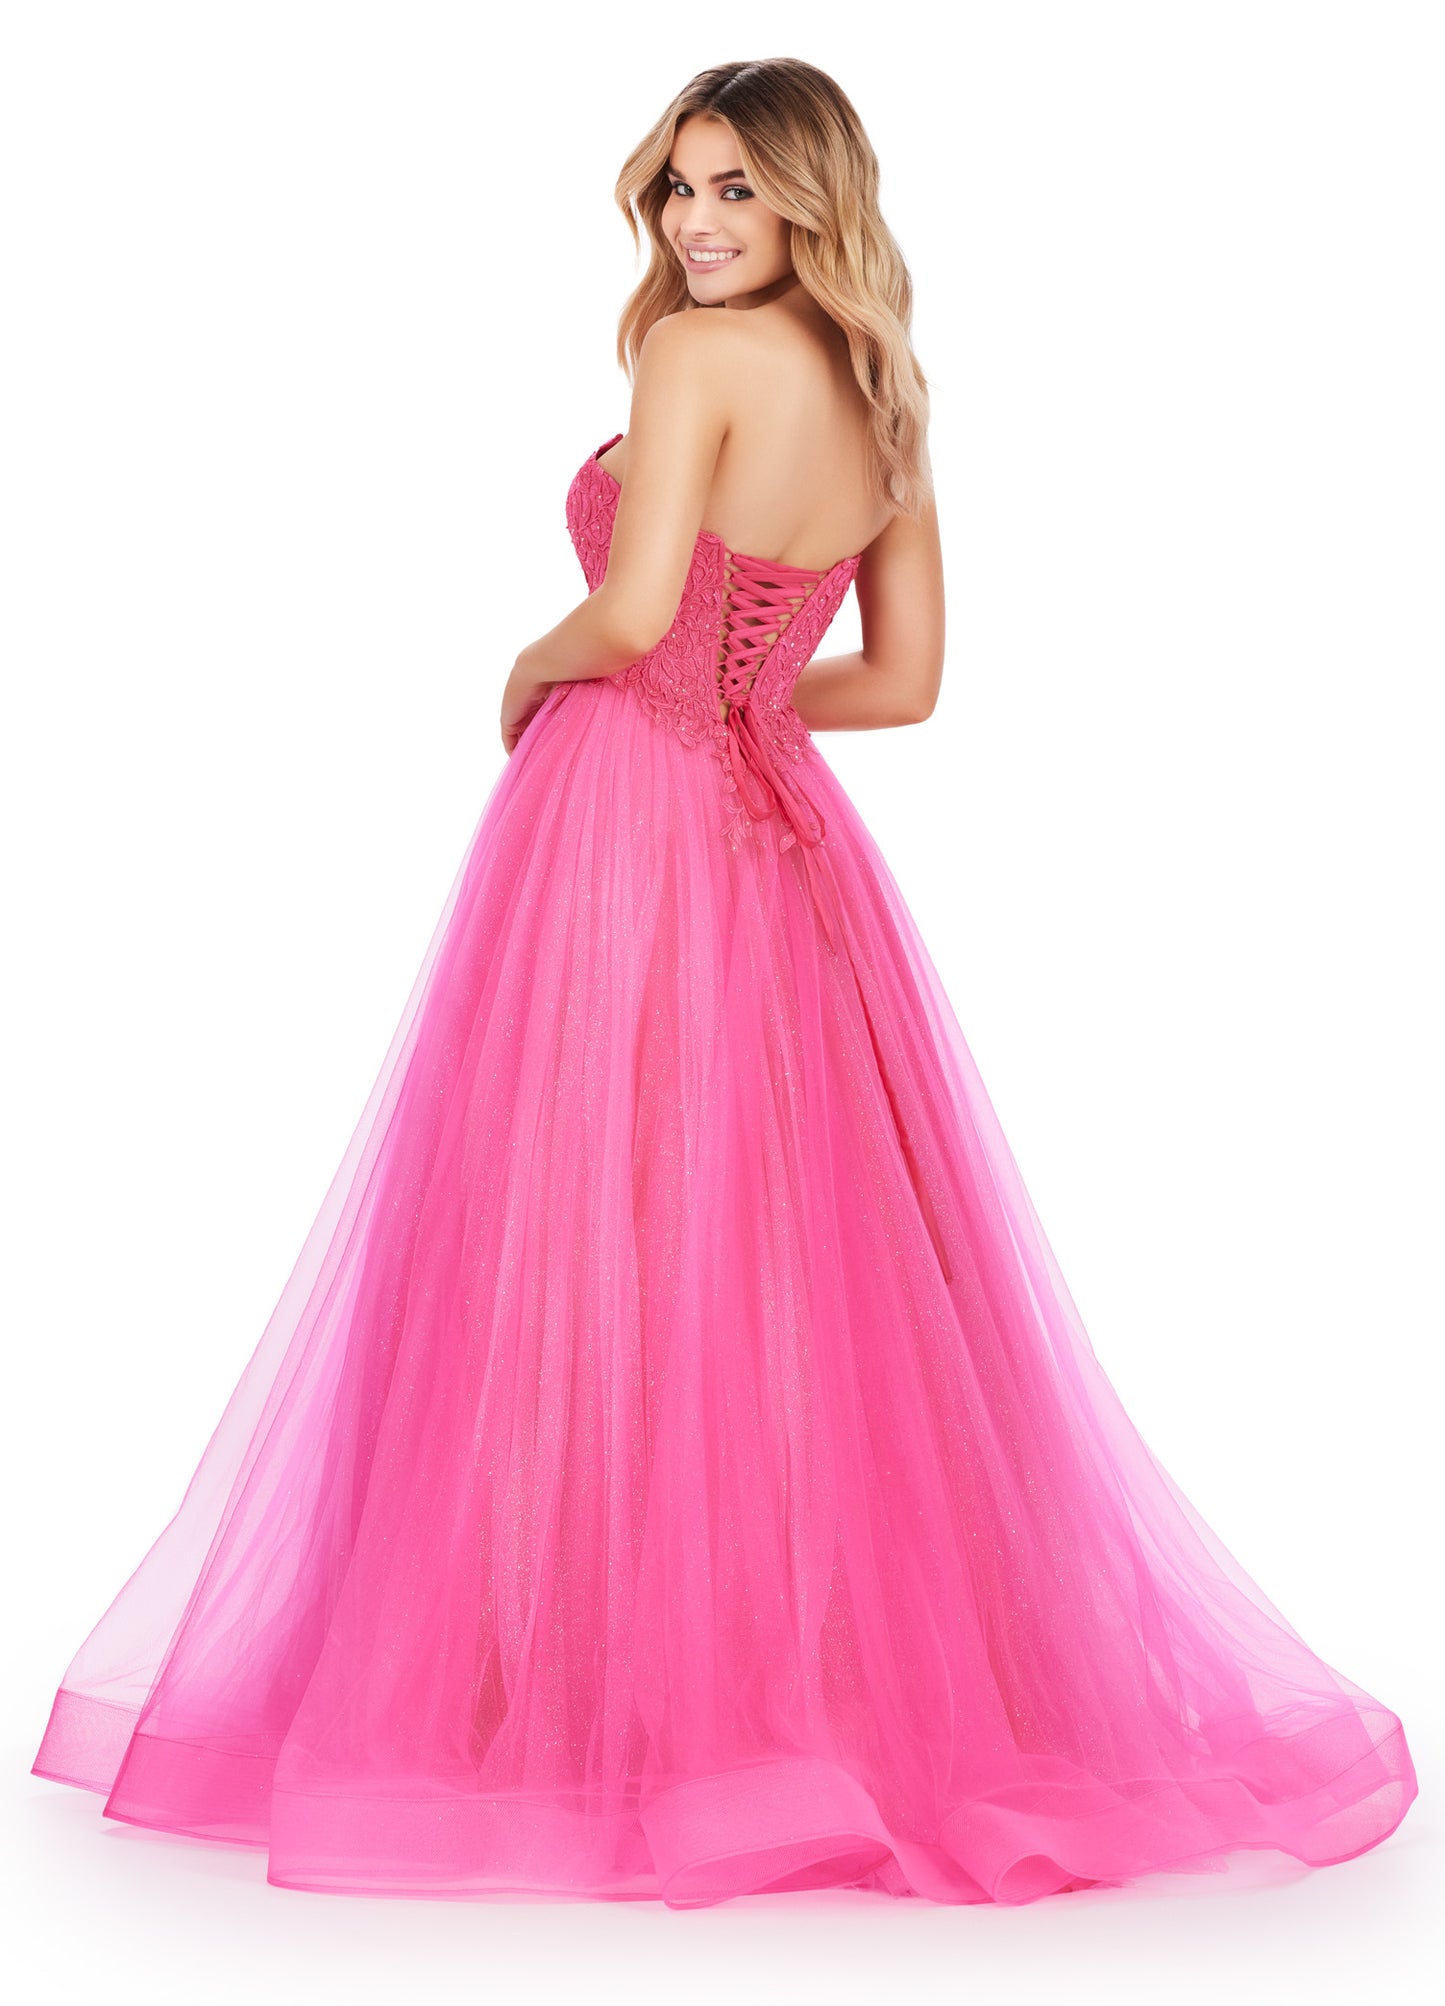 The Ashley Lauren 11518 is a stunning long prom dress that features a corset design and glitter tulle ball gown. The sweetheart neckline and formal pageant gown style make this dress perfect for any special occasion. Feel elegant and glamorous in this expertly crafted dress. The most romantic dress! This A-Line glitter tulle ball gown features a lace applique corset that laces up in the back.